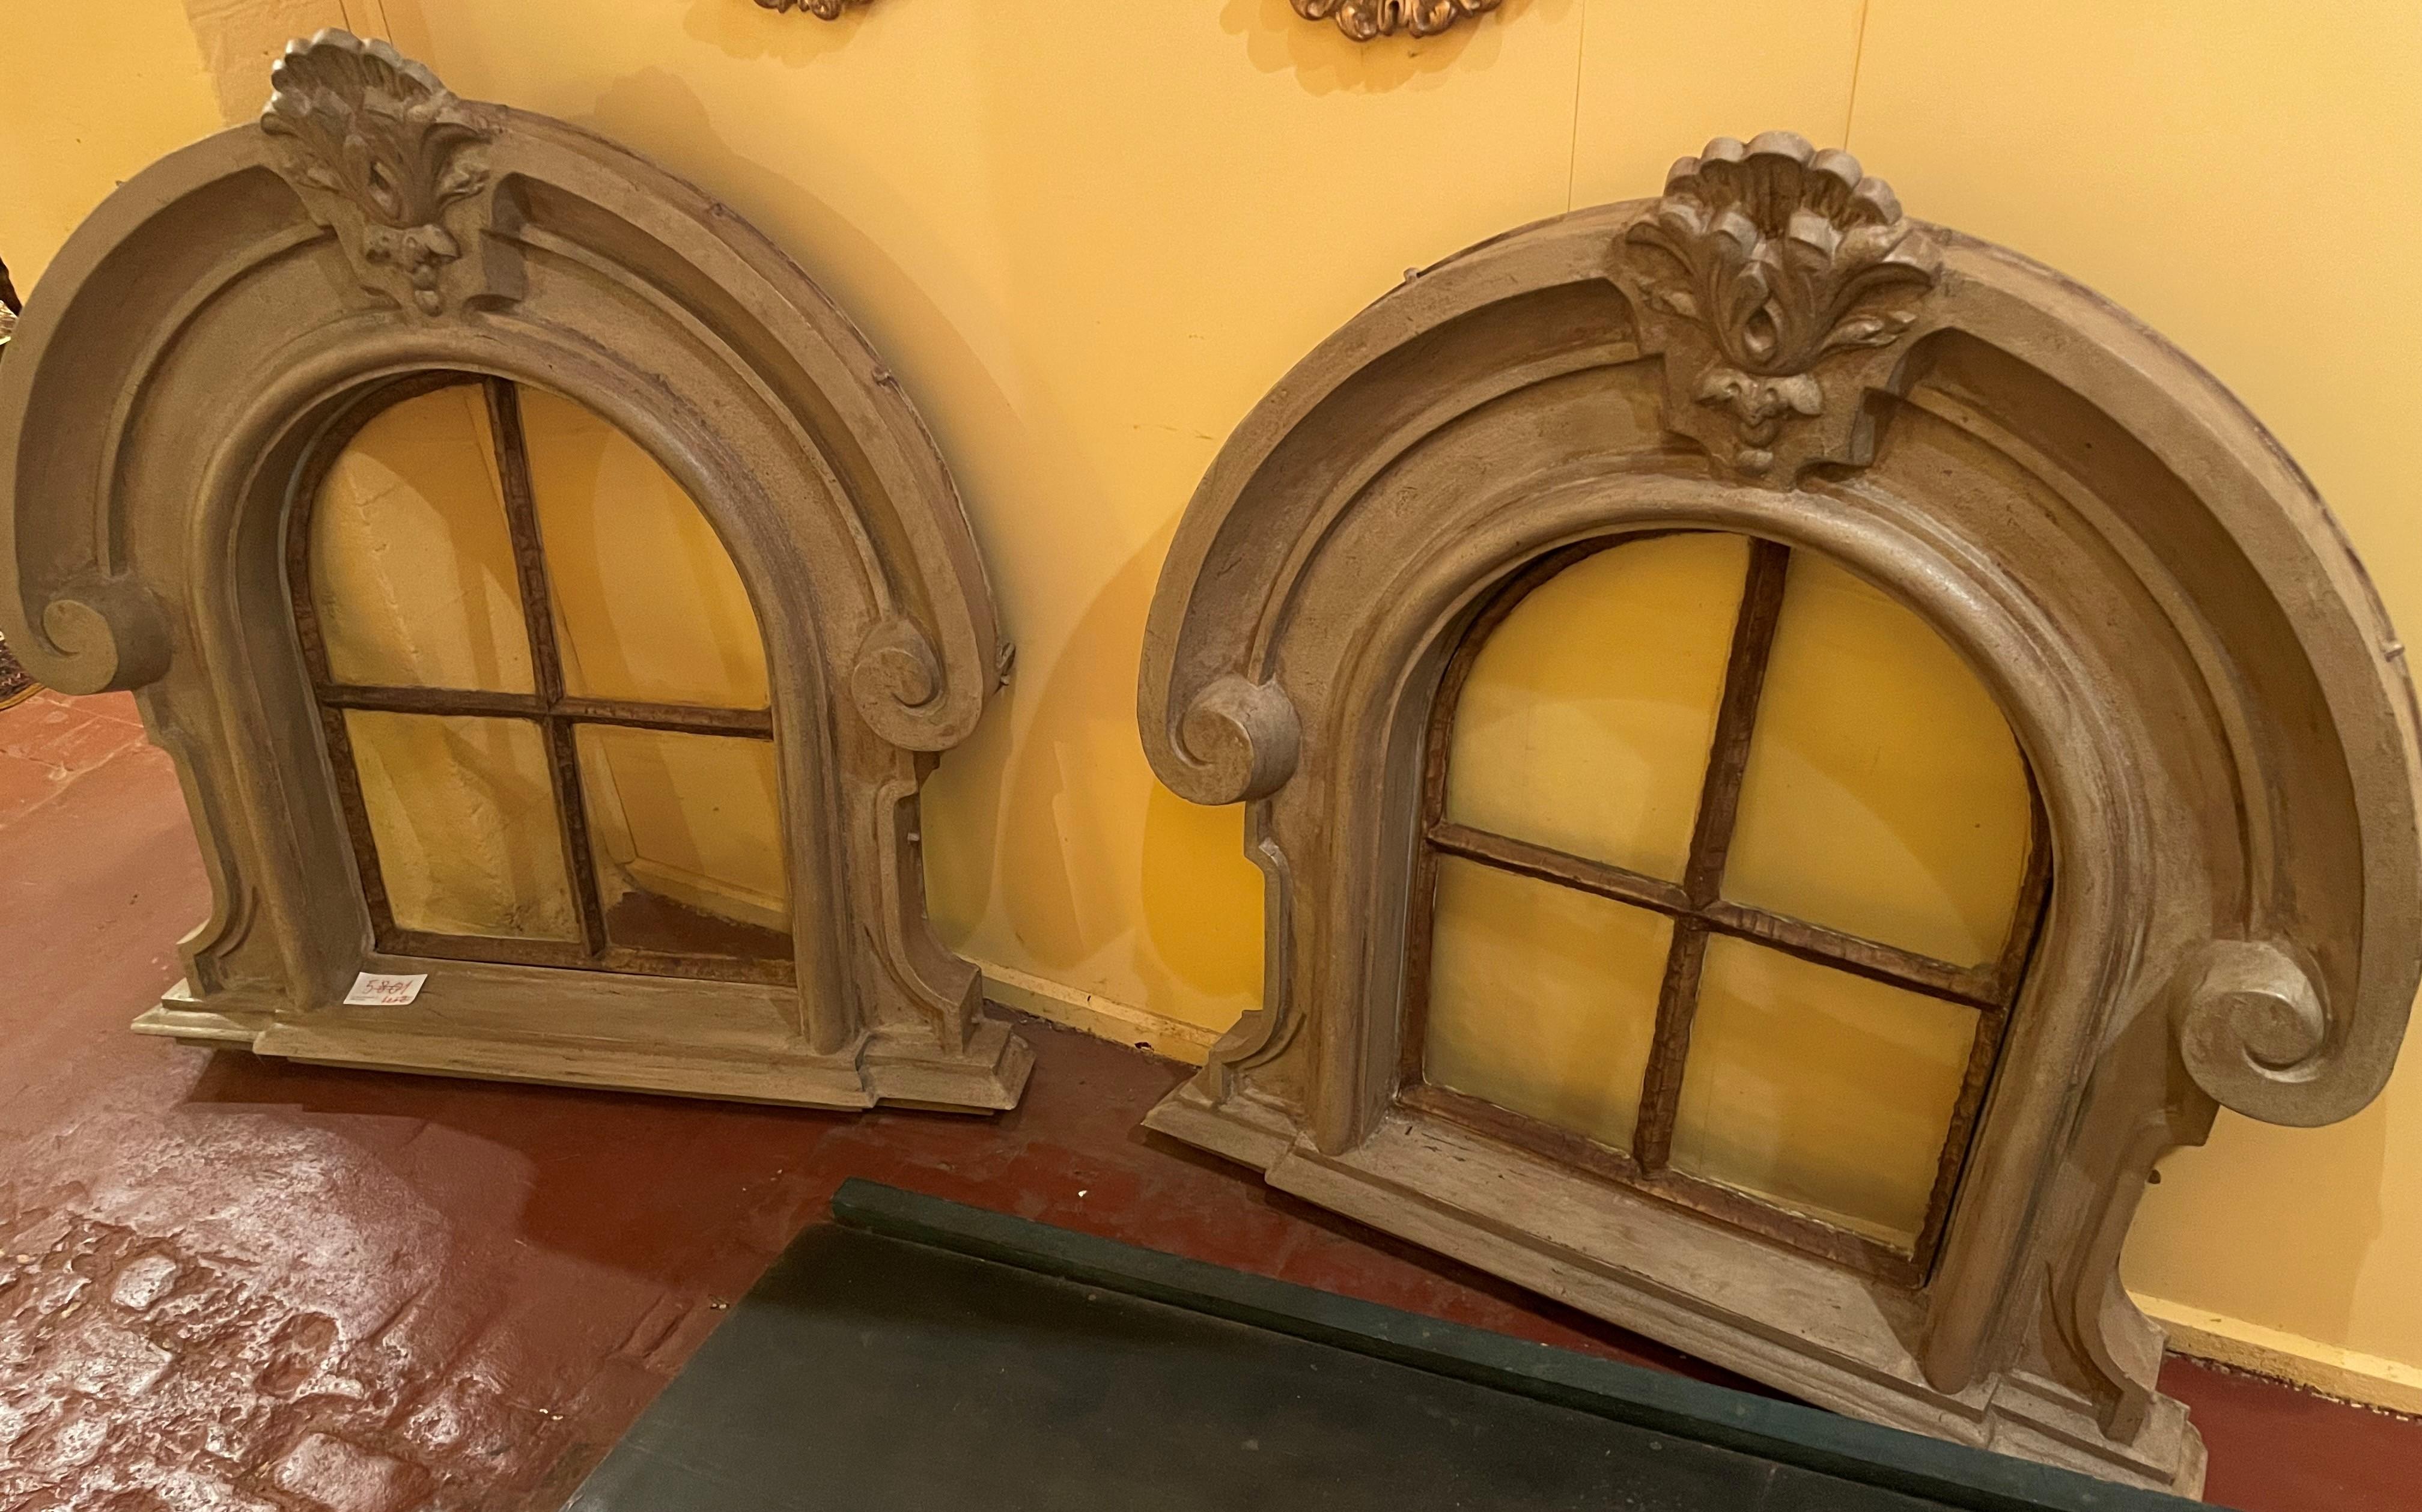 Two 19th century polychrome cast iron dormer windows

in very good condition
Beautiful patina.